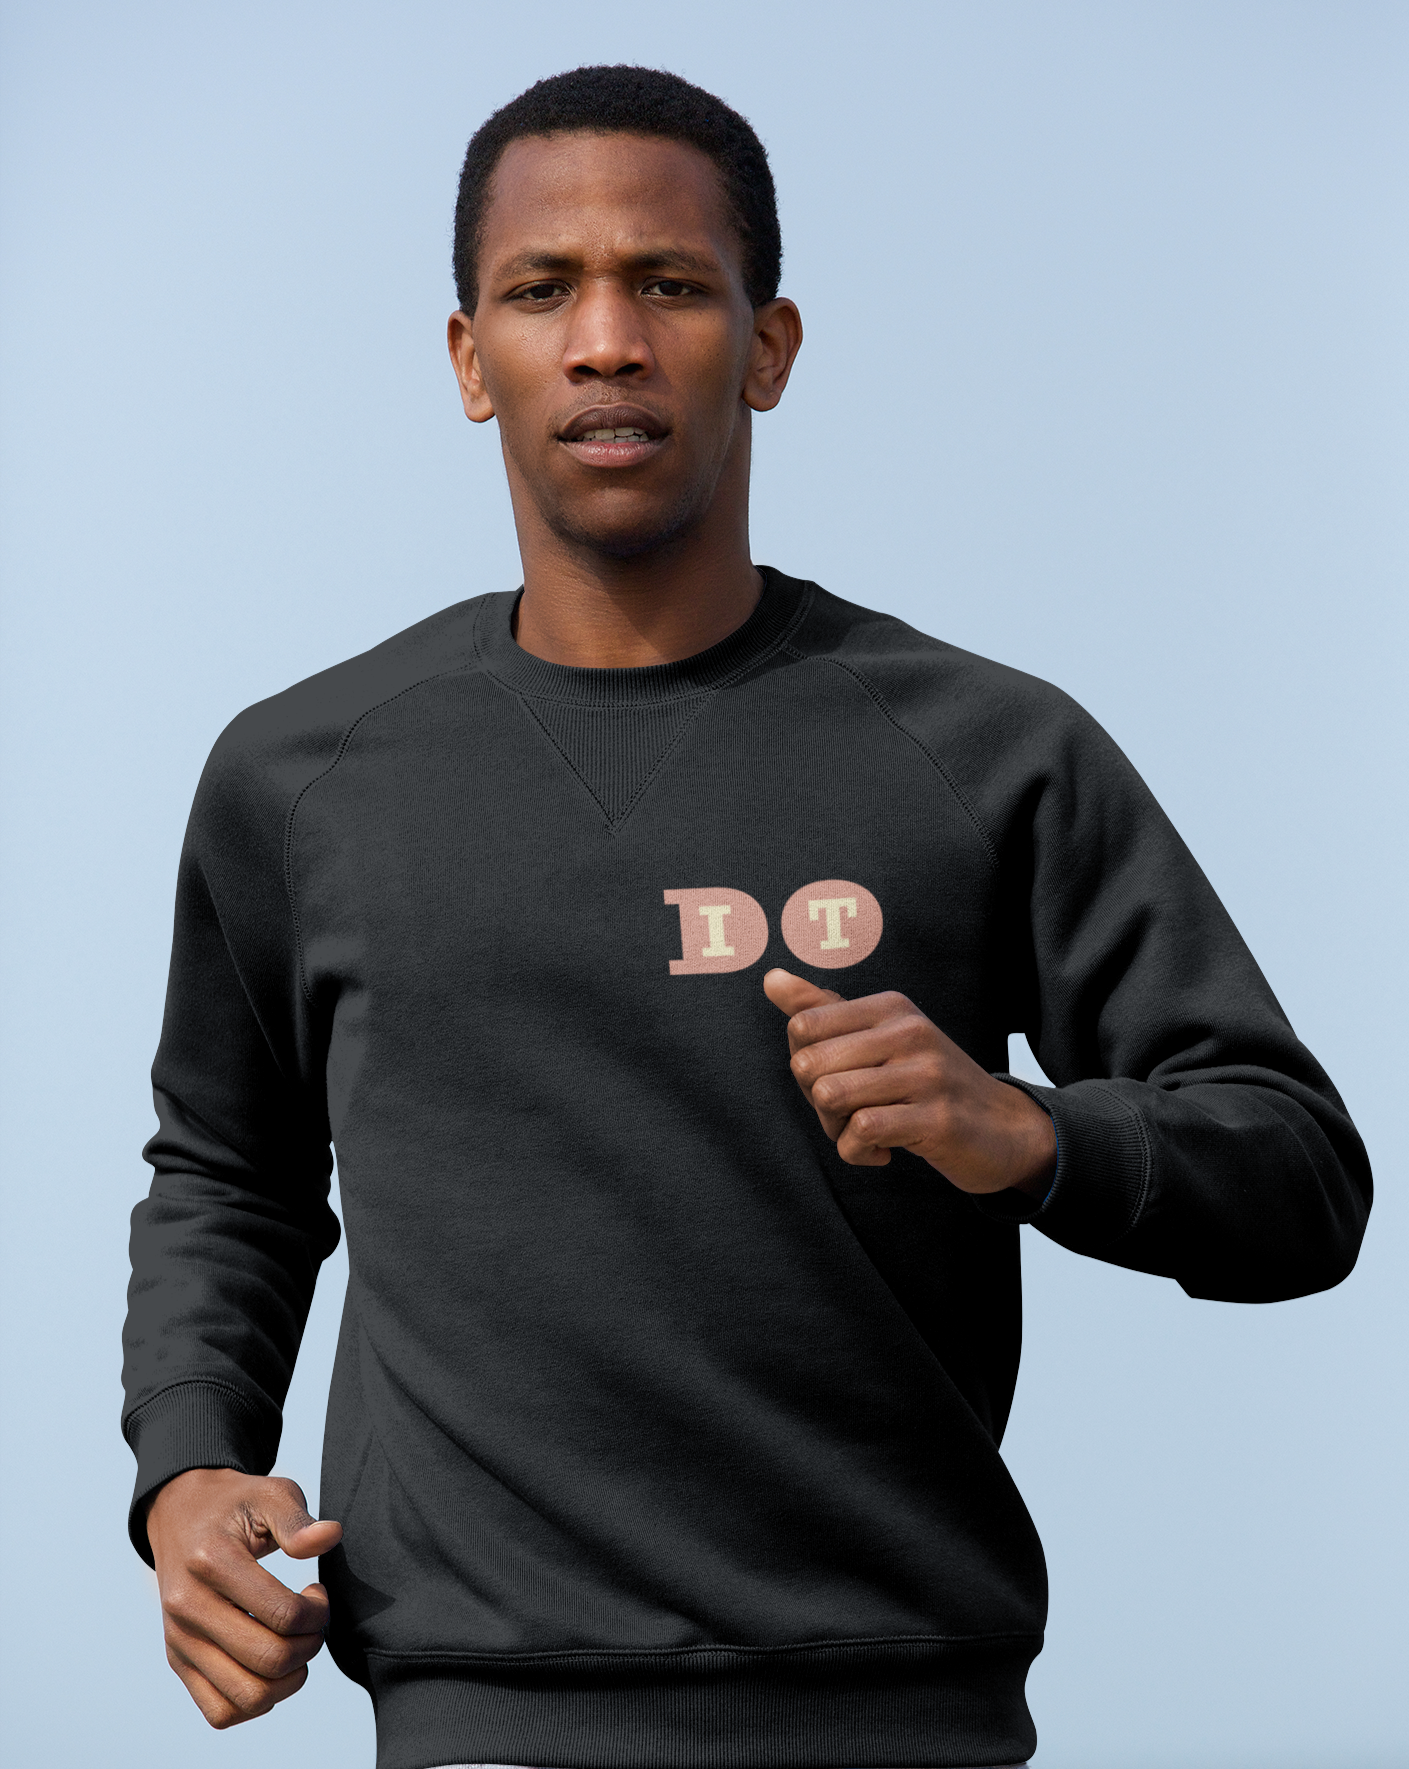 DO IT! This inspirational and cute crewneck sweatshirt is perfect for those cold mornings going into the gym or that brisk walk around the park.  Makes a great gift for those active friends in your life.